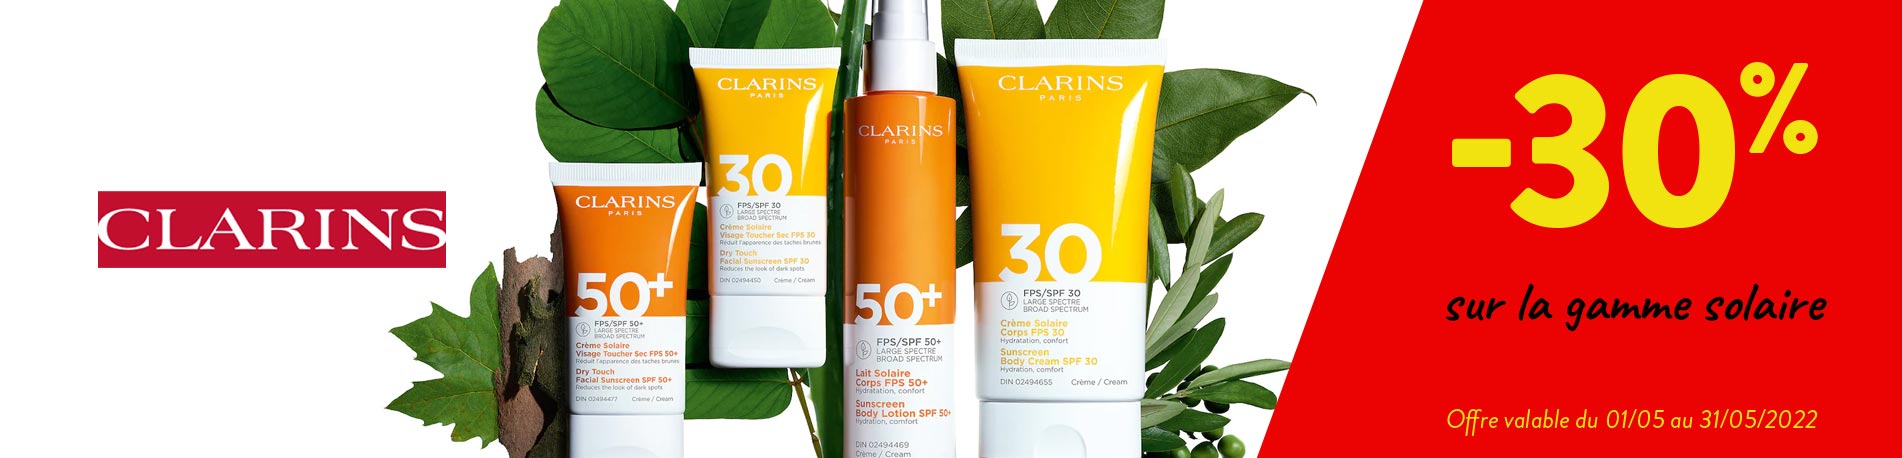 Promotion Clarins Solaire